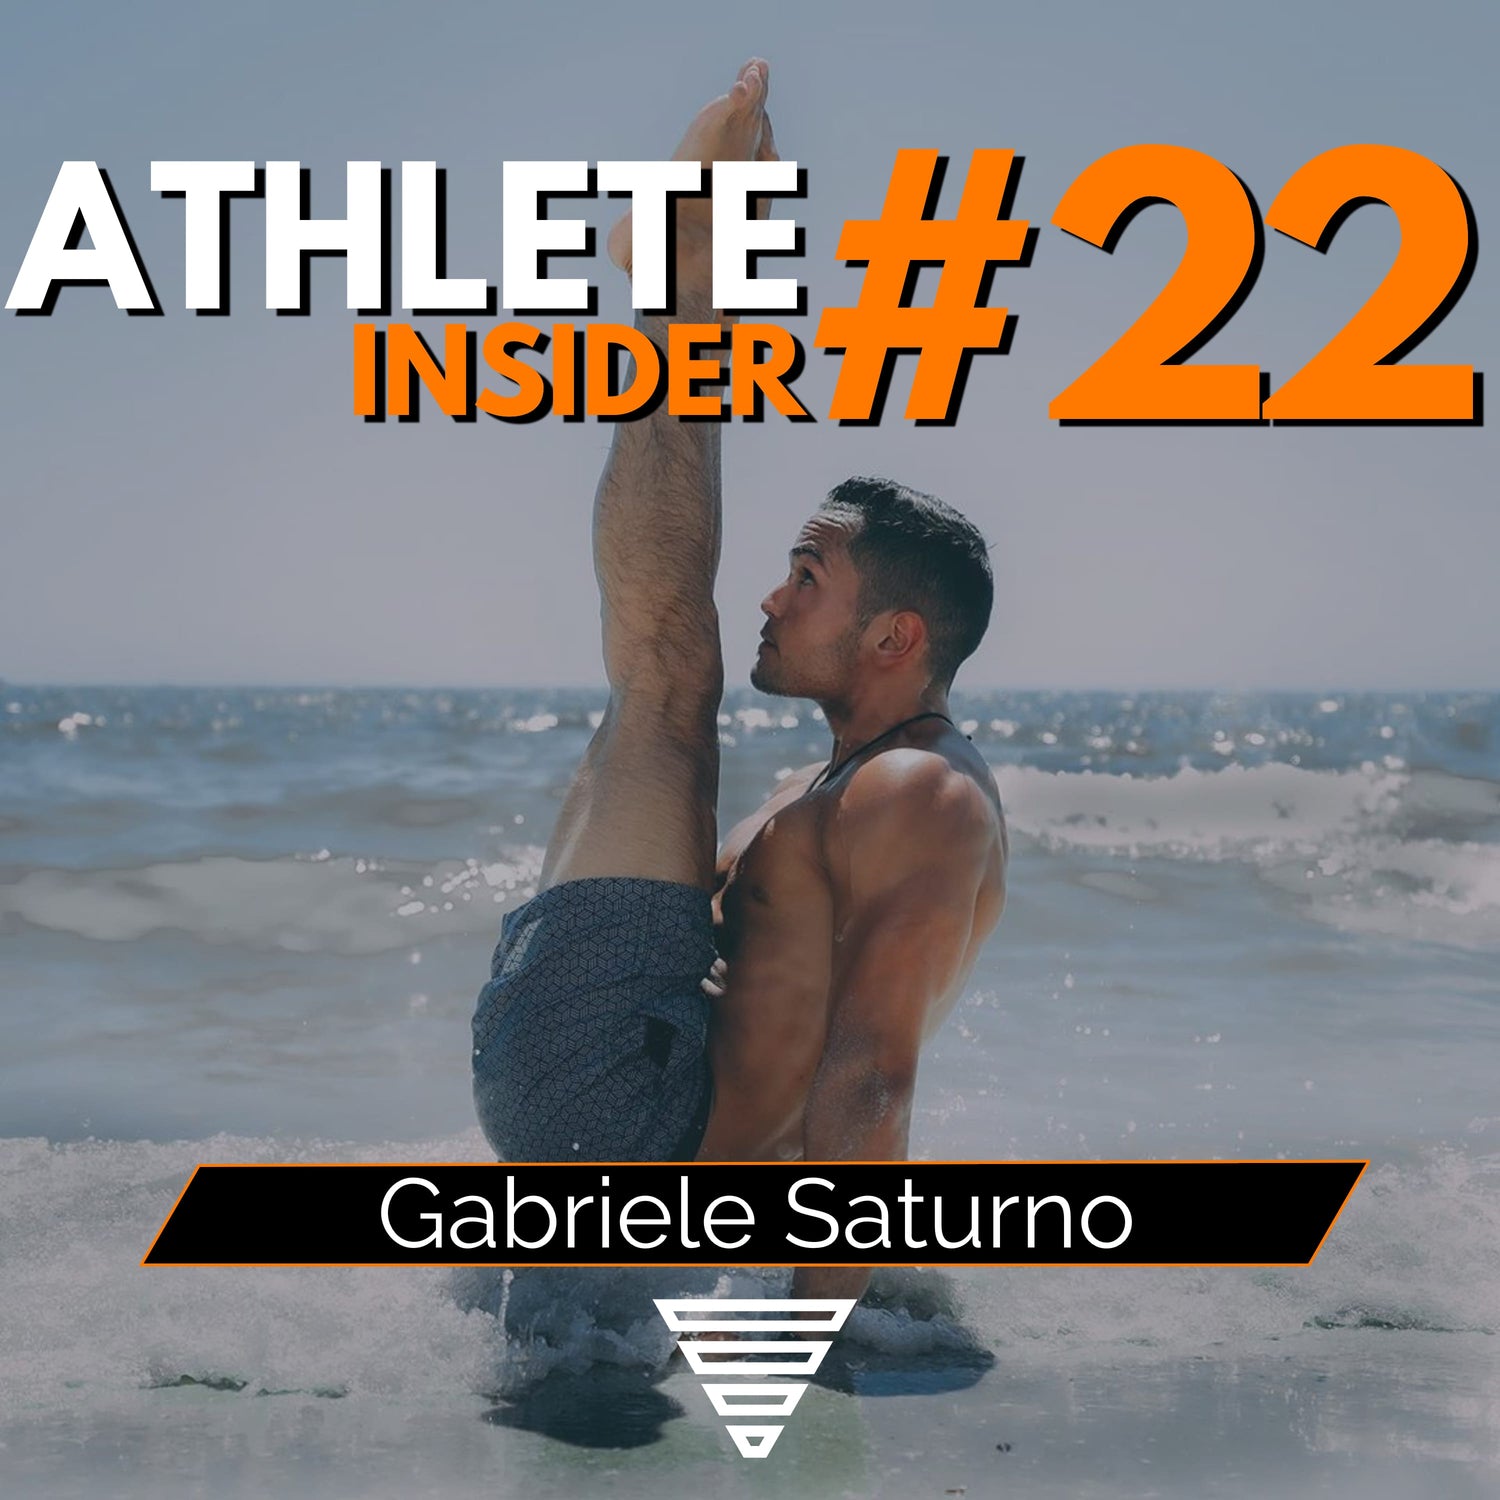 GABO SATURNO | Drugs, THENX, Training & Nutrition | Interview | The Athlete Insider Podcast #22